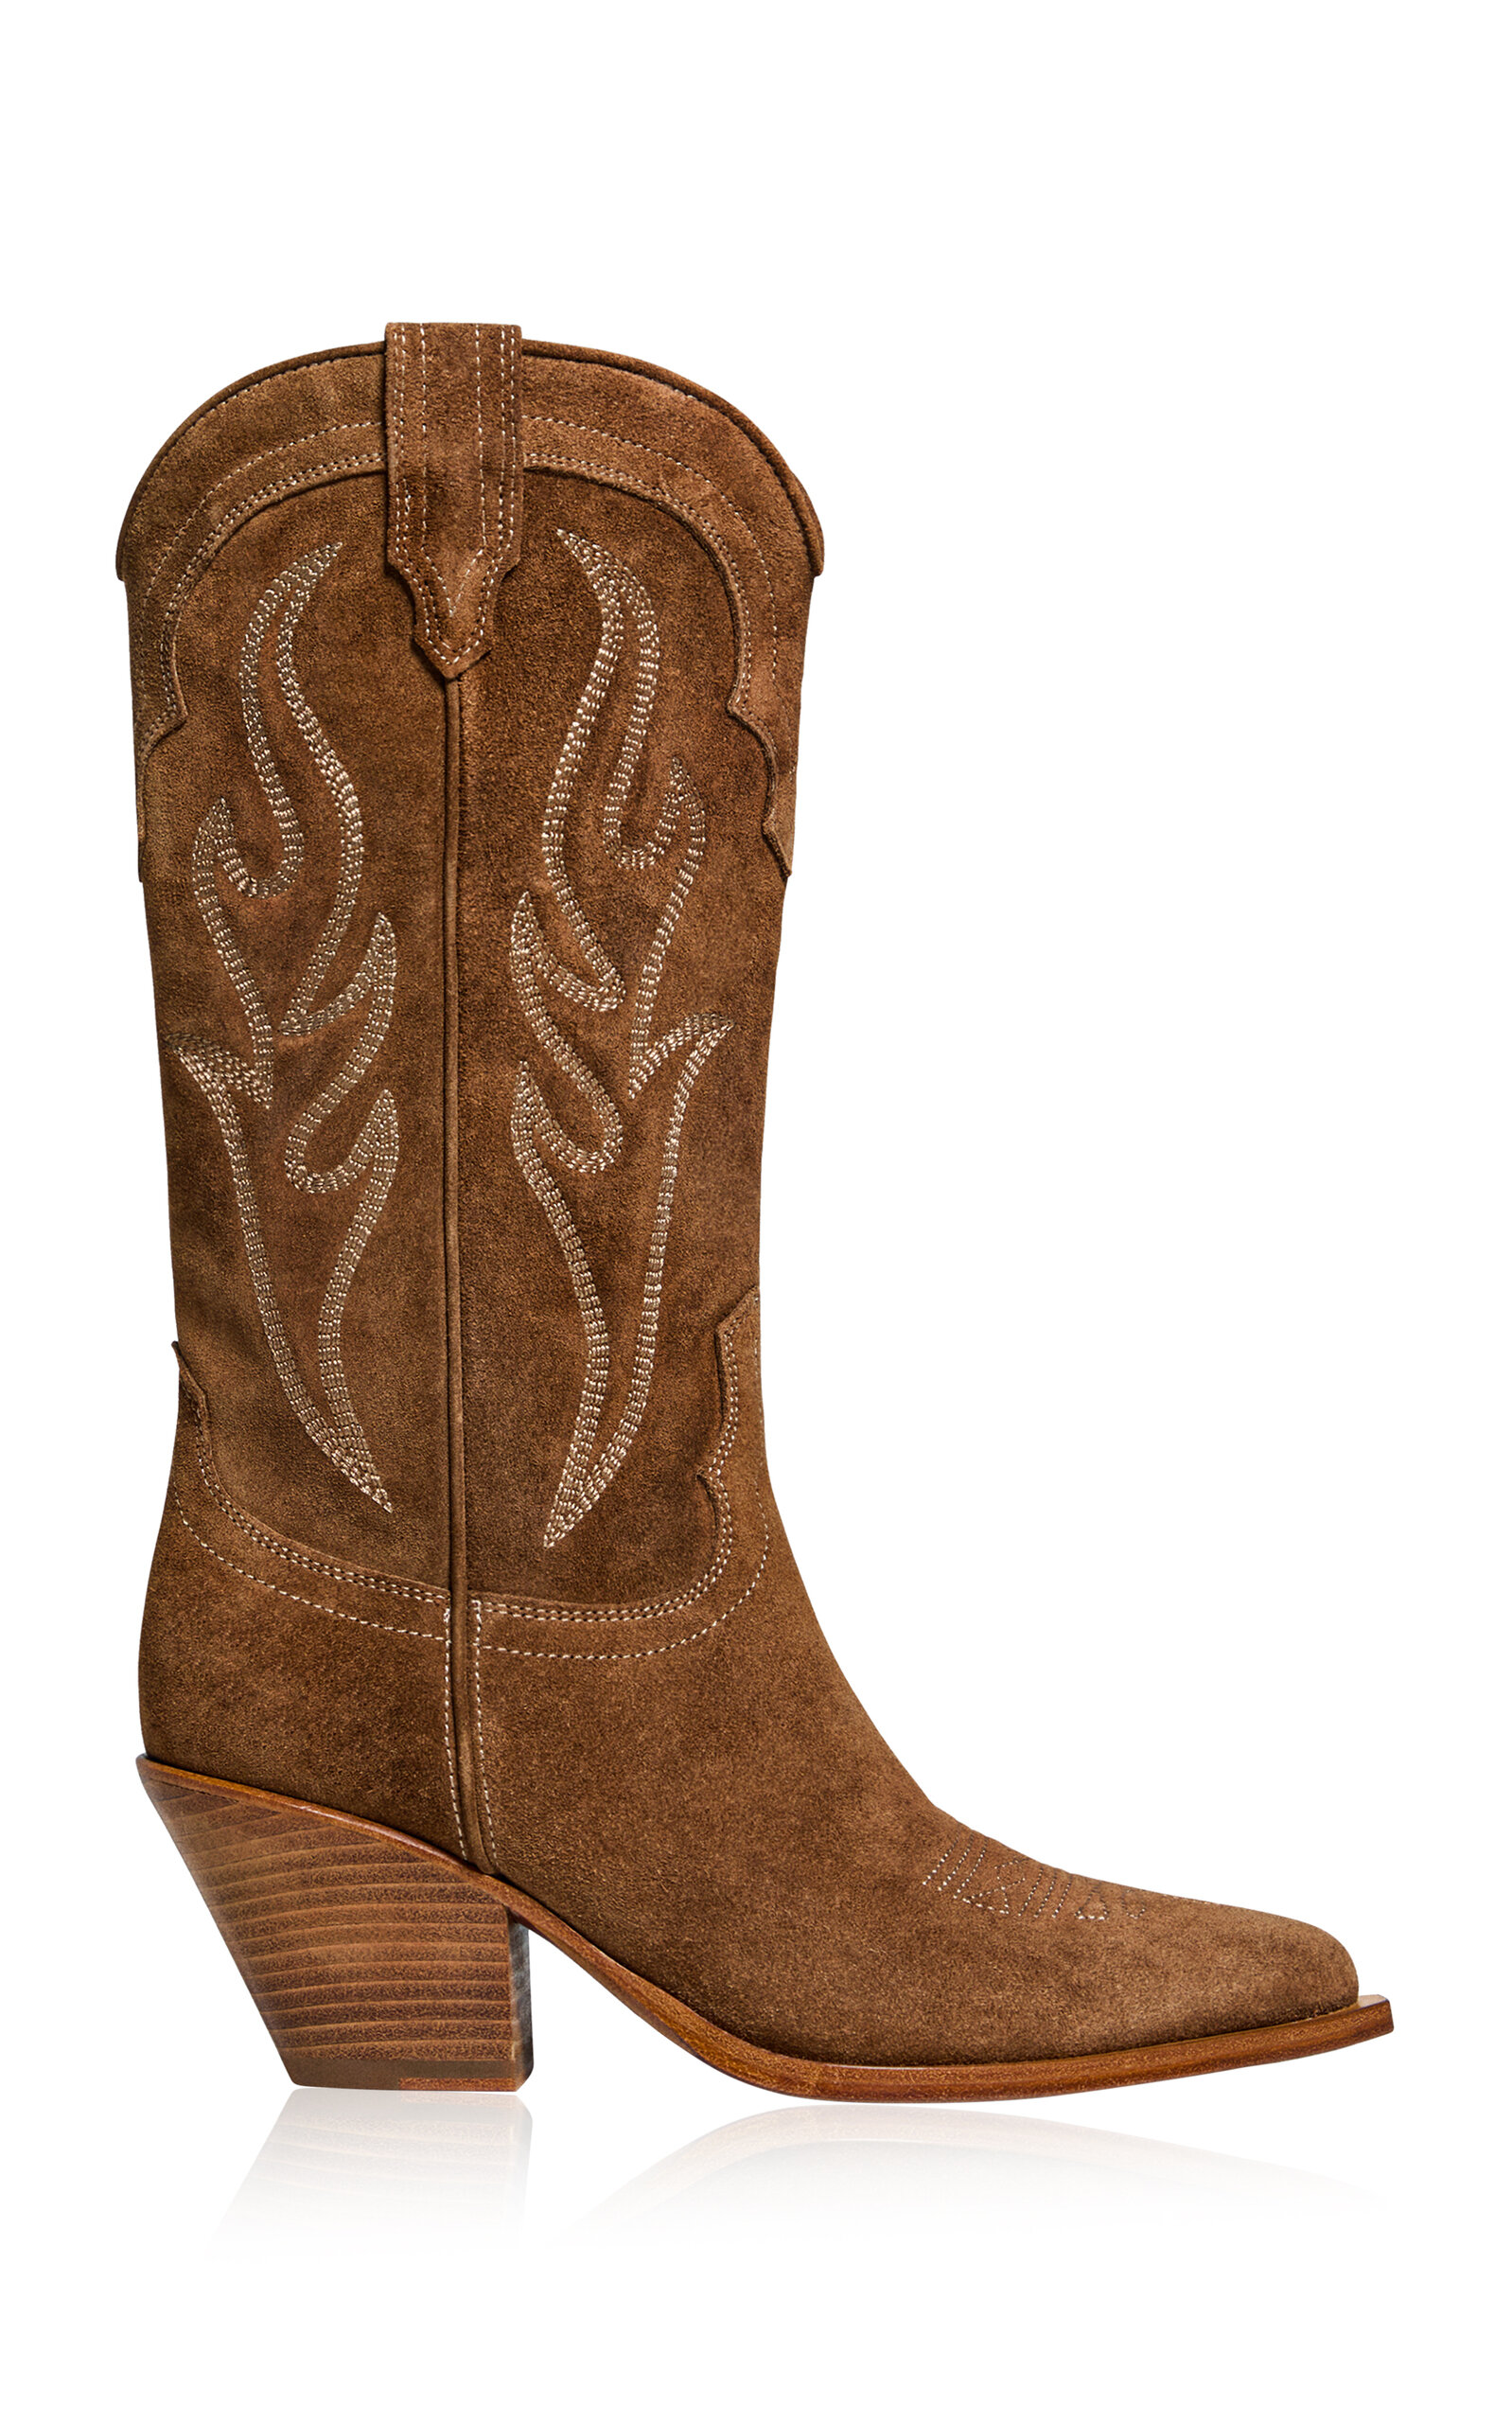 Santa Fe Embroidered Suede Western Boots